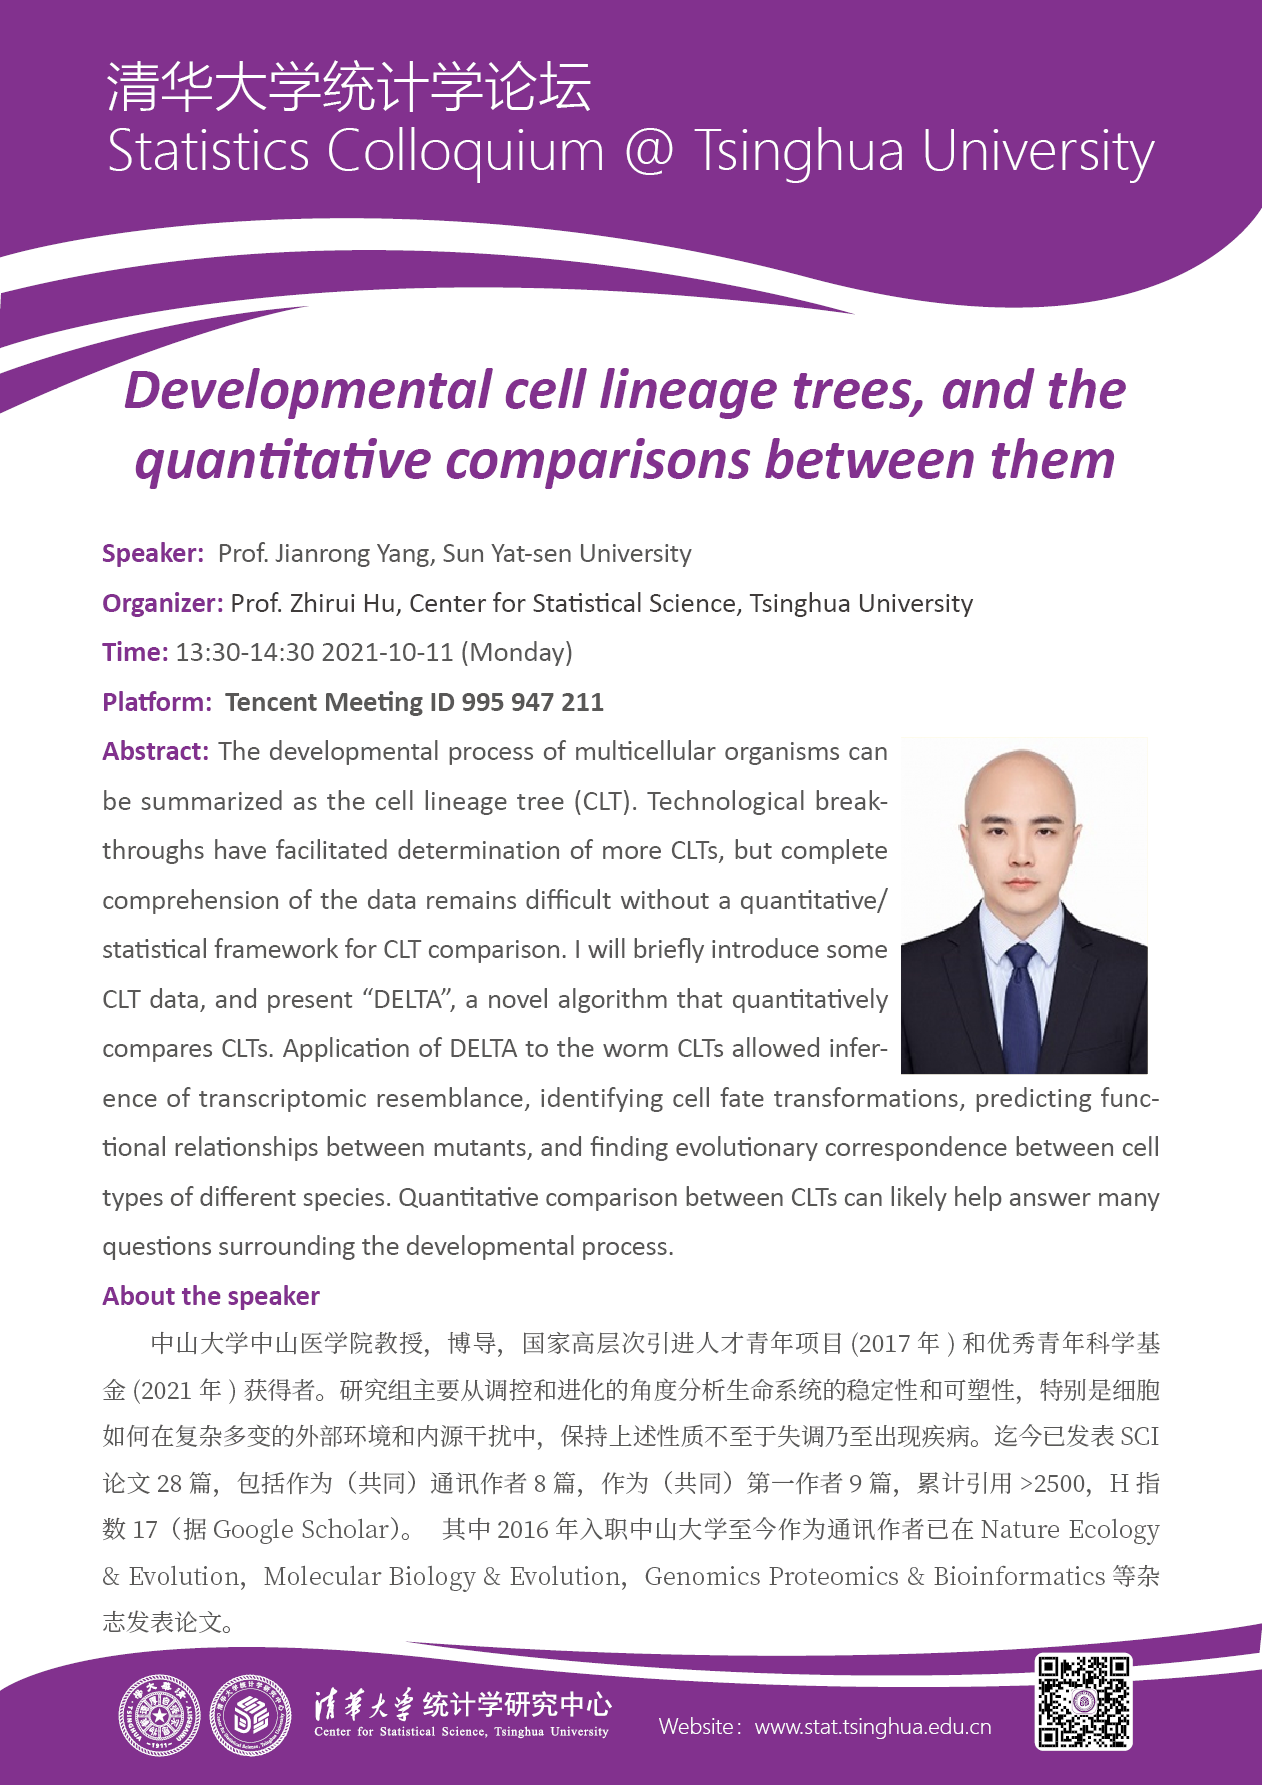 Developmental cell lineage trees, and the quantitative comparisons between them